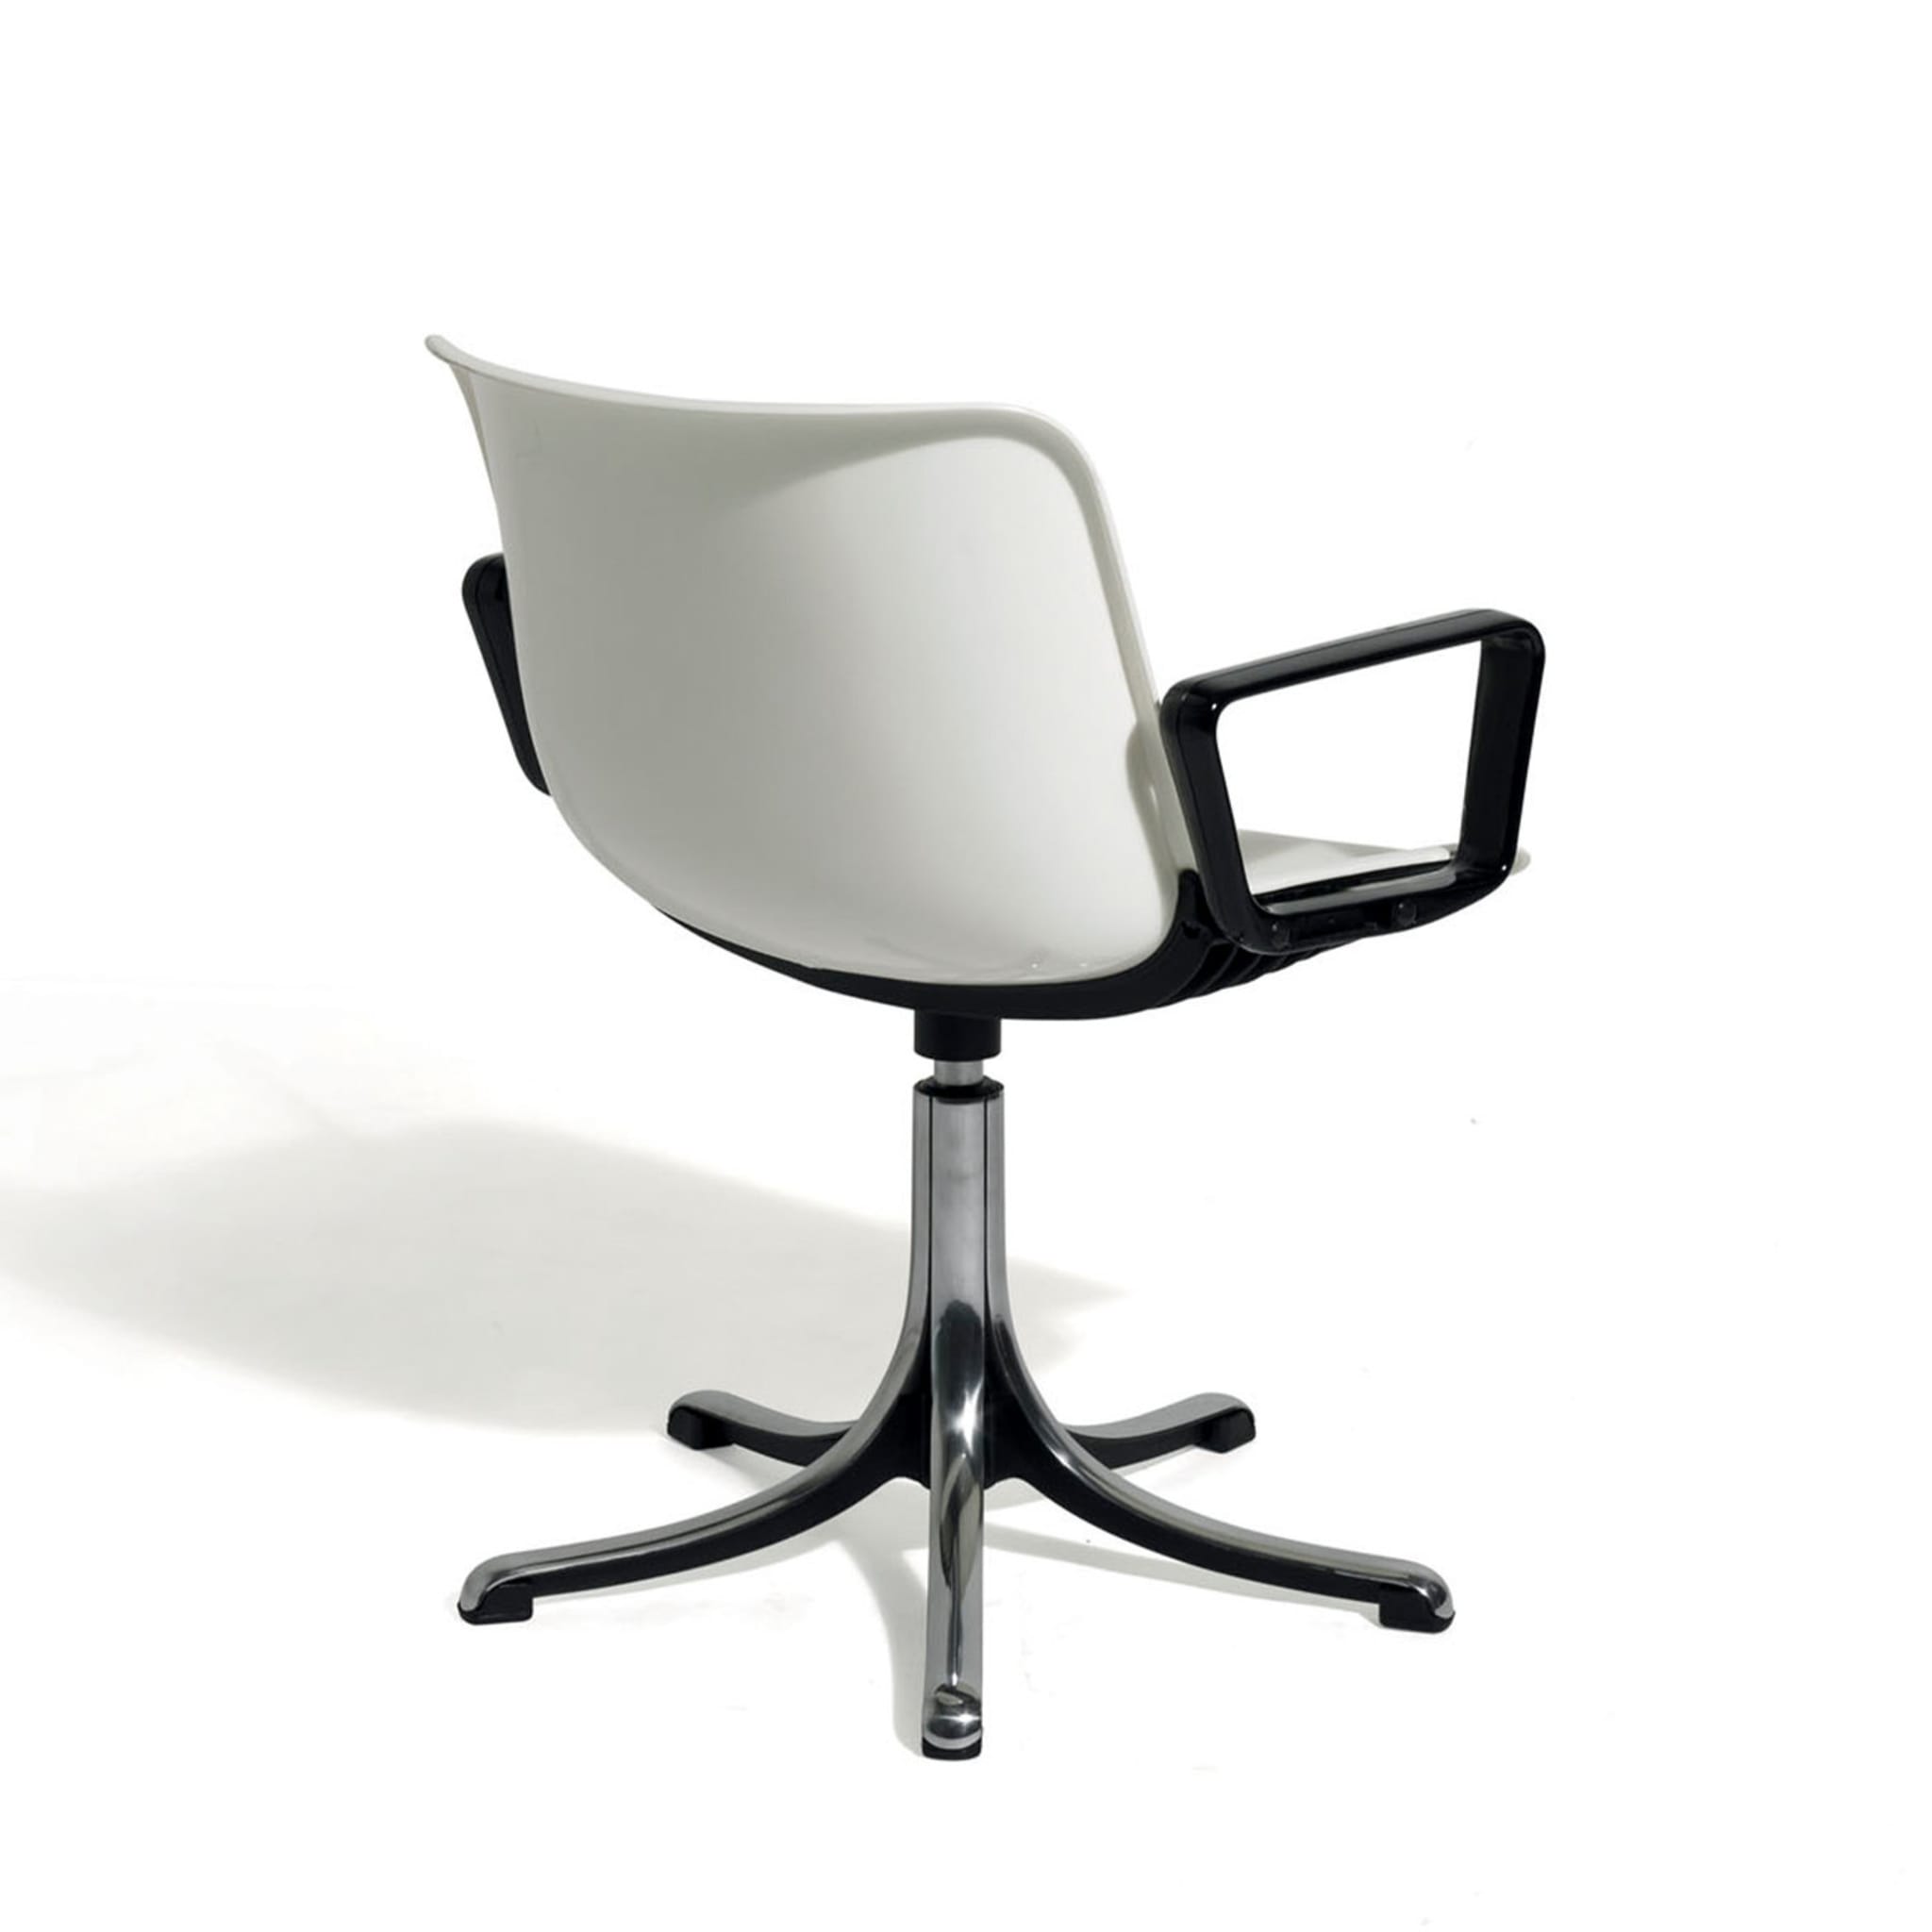 Modus White Chair with Armrests by Centro Progetti Tecno - Alternative view 2